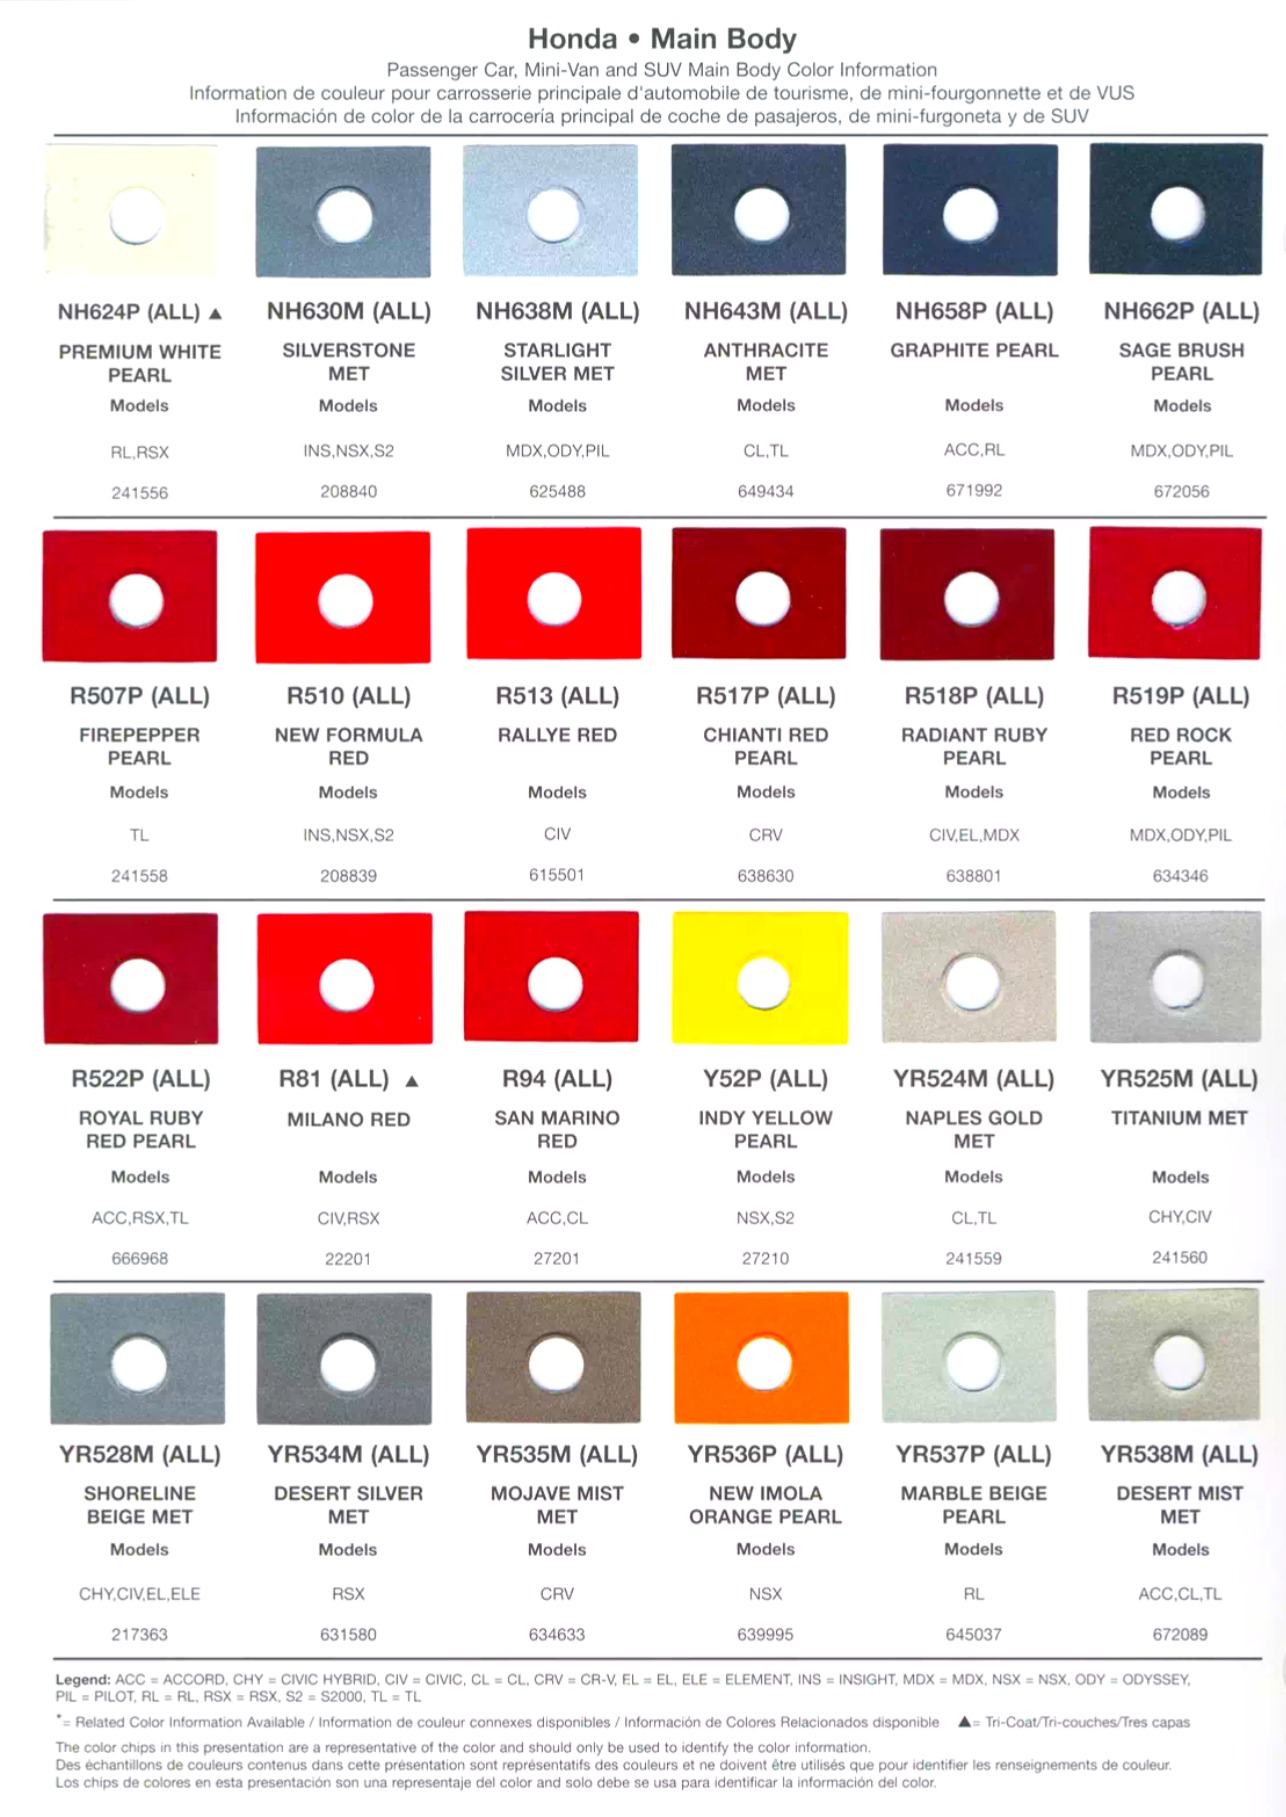 Color Swatches of Honda vehicles.